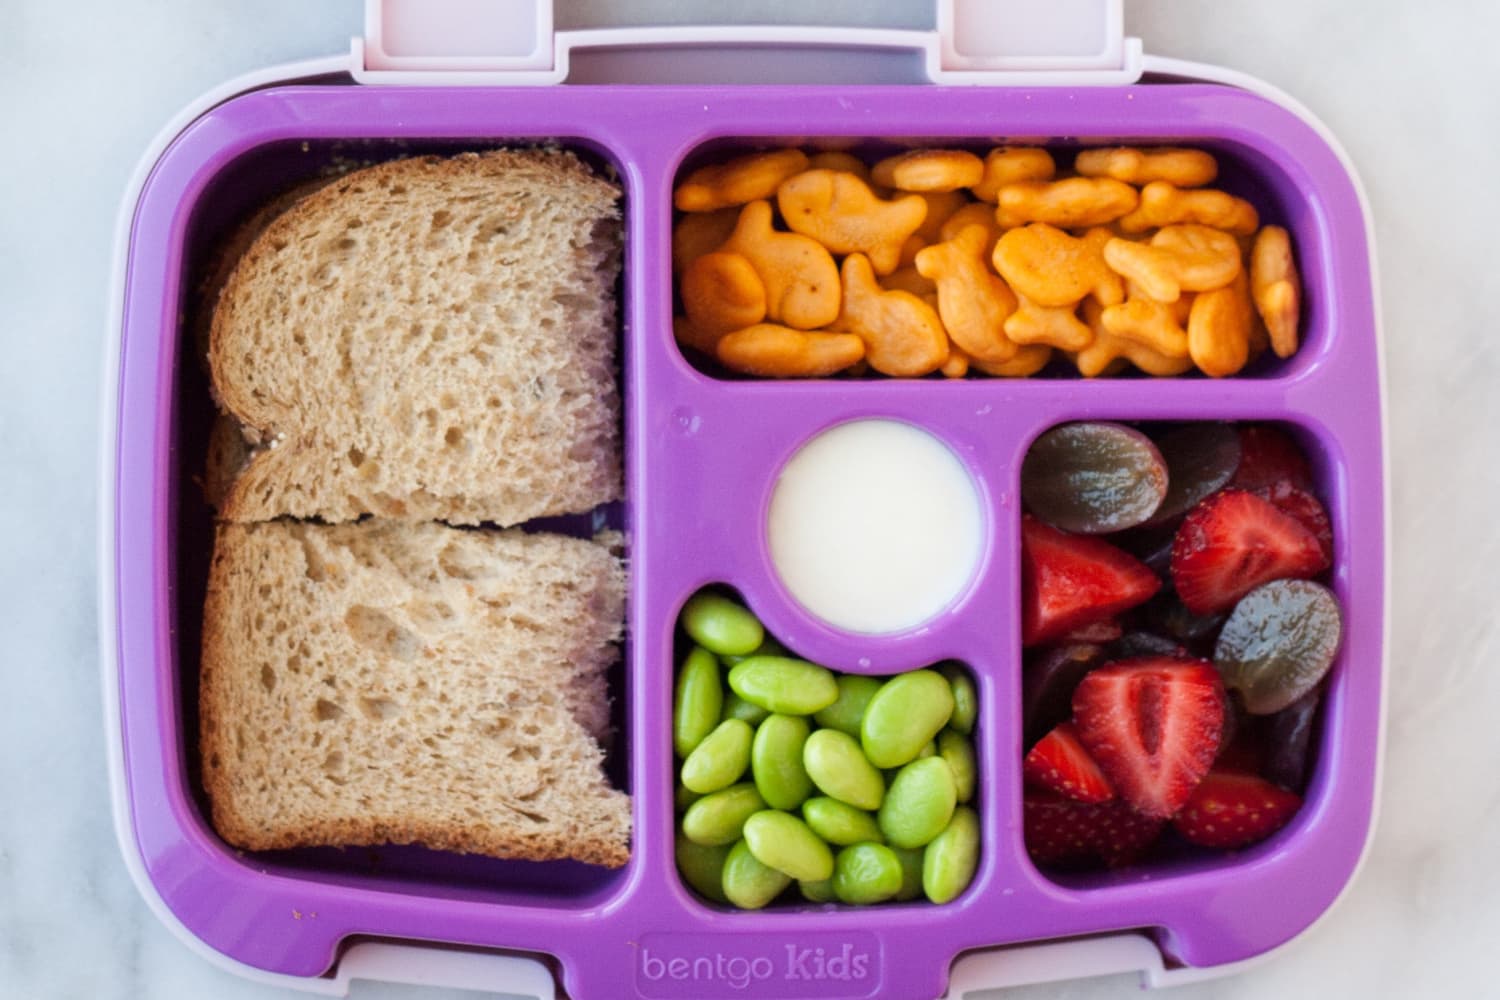 Bentgo Review: Best Bento Lunch Boxes for Kids